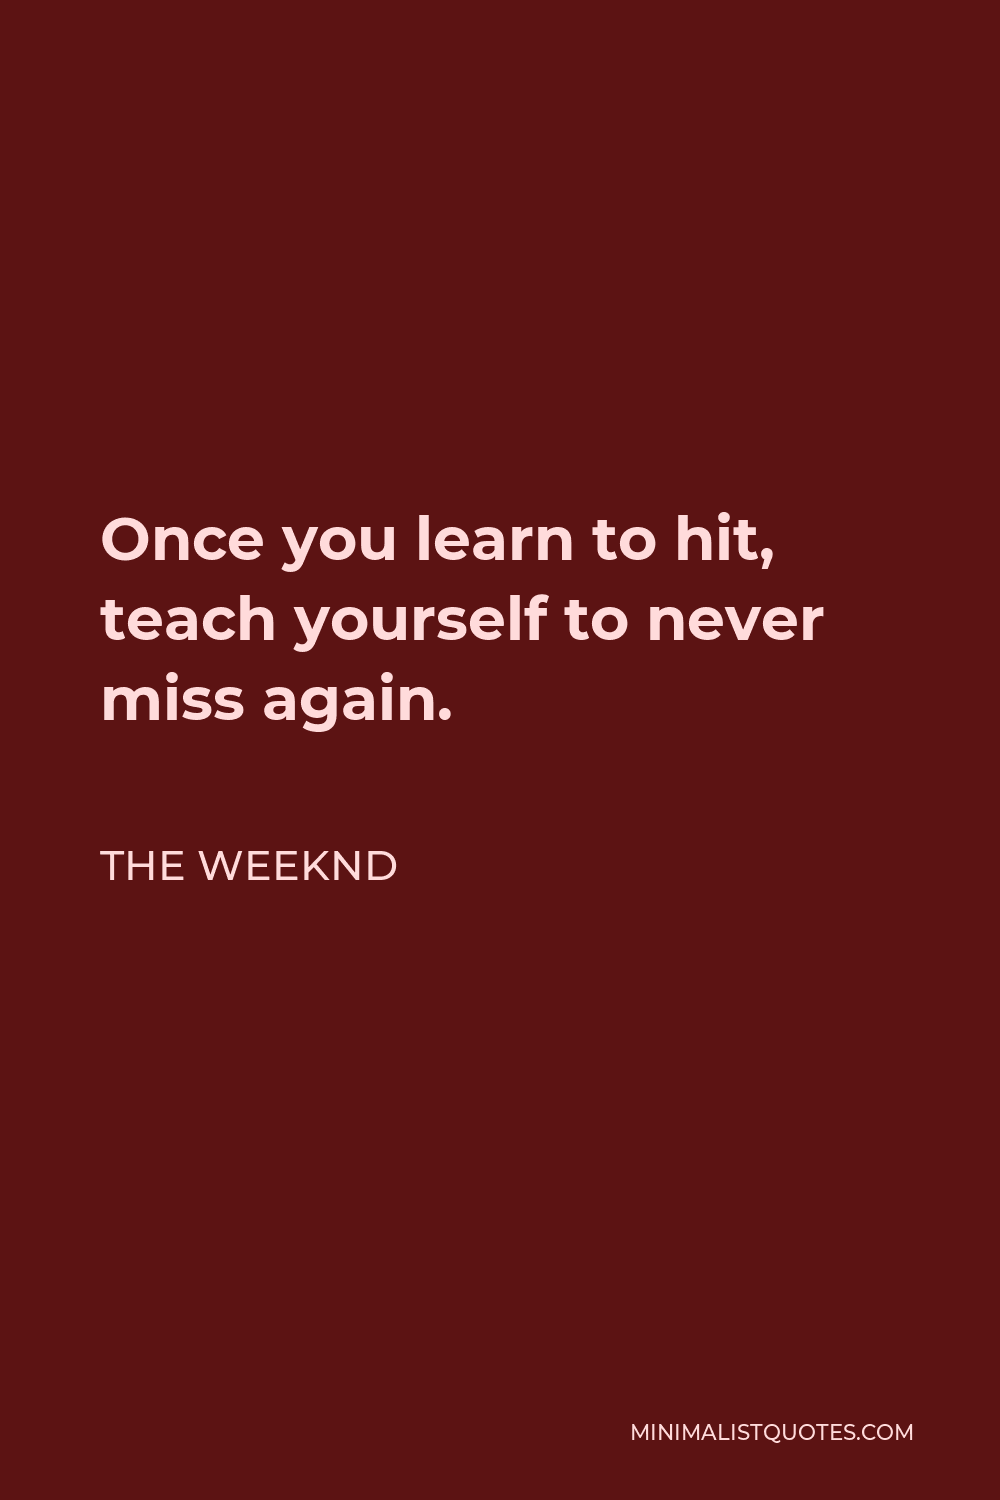 The Weeknd Quote - Once you learn to hit, teach yourself to never miss again.